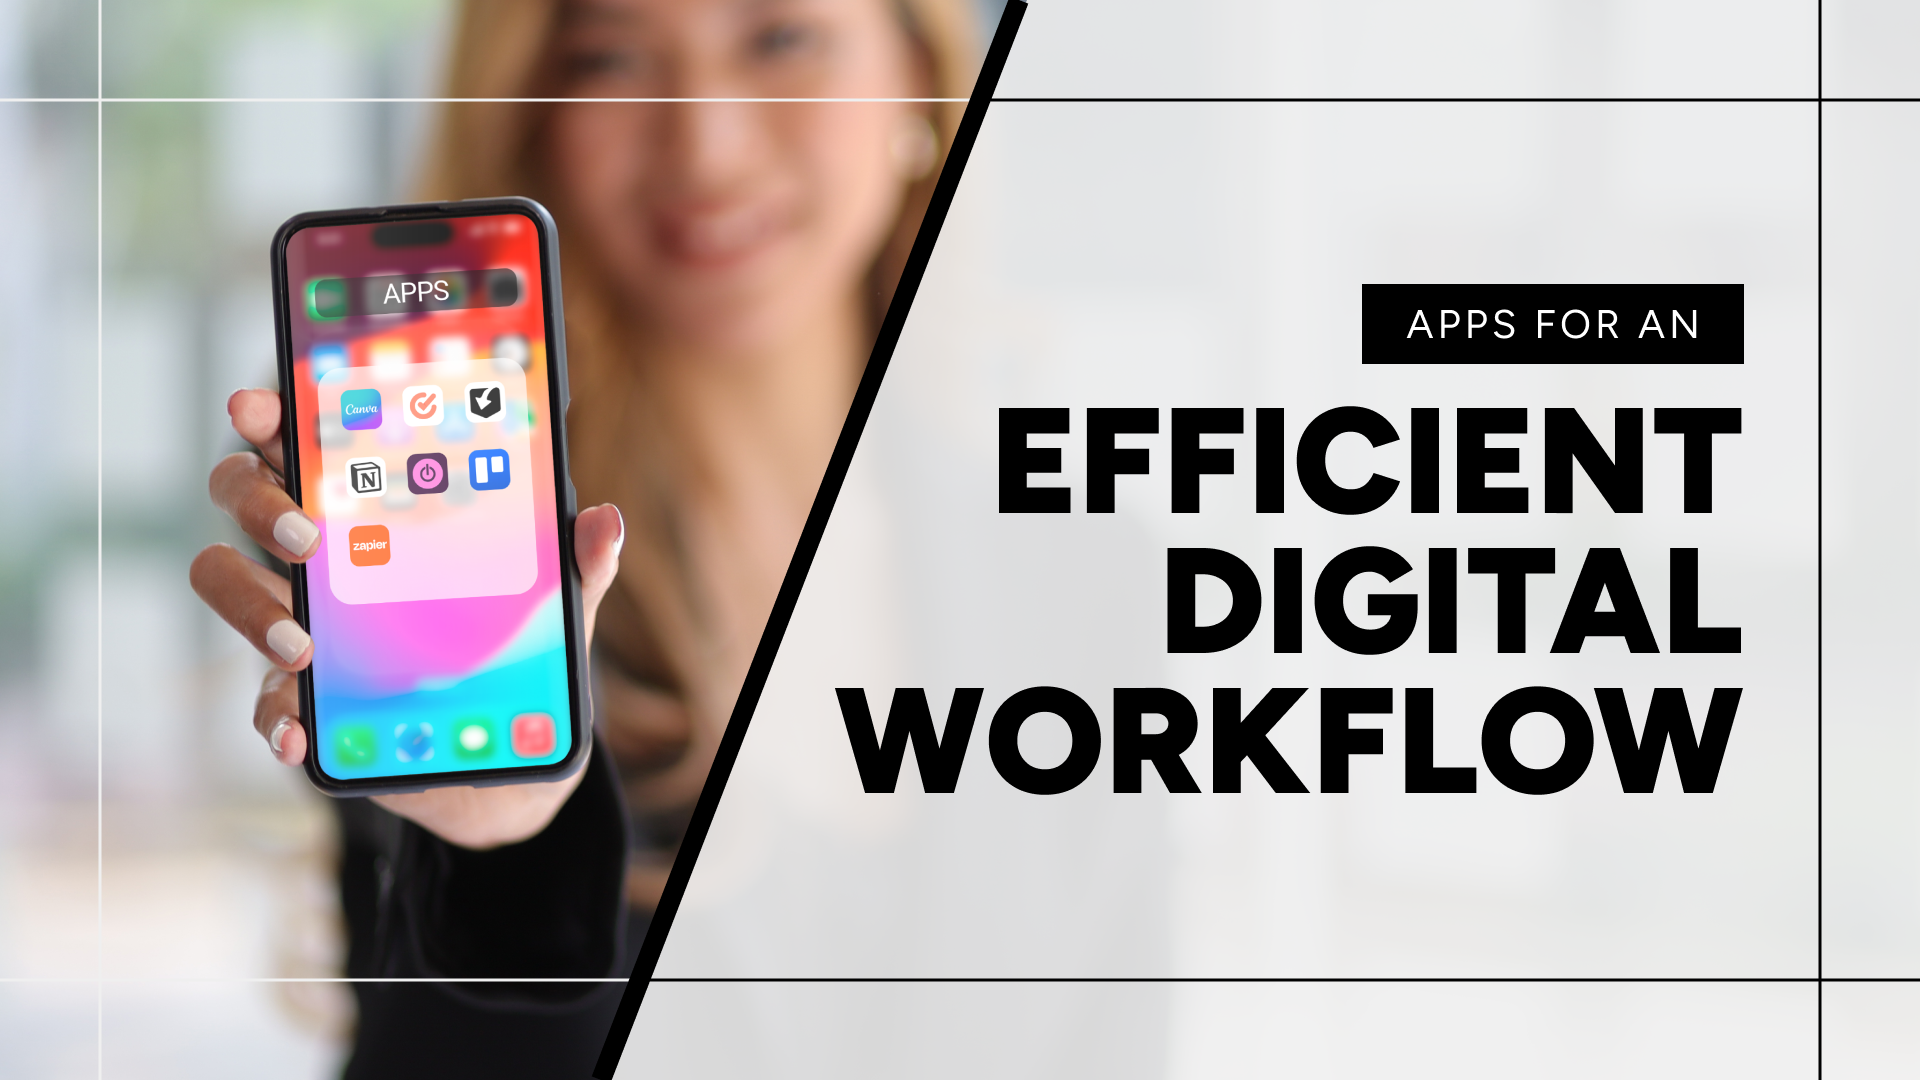 Apps for an efficient digital workflow